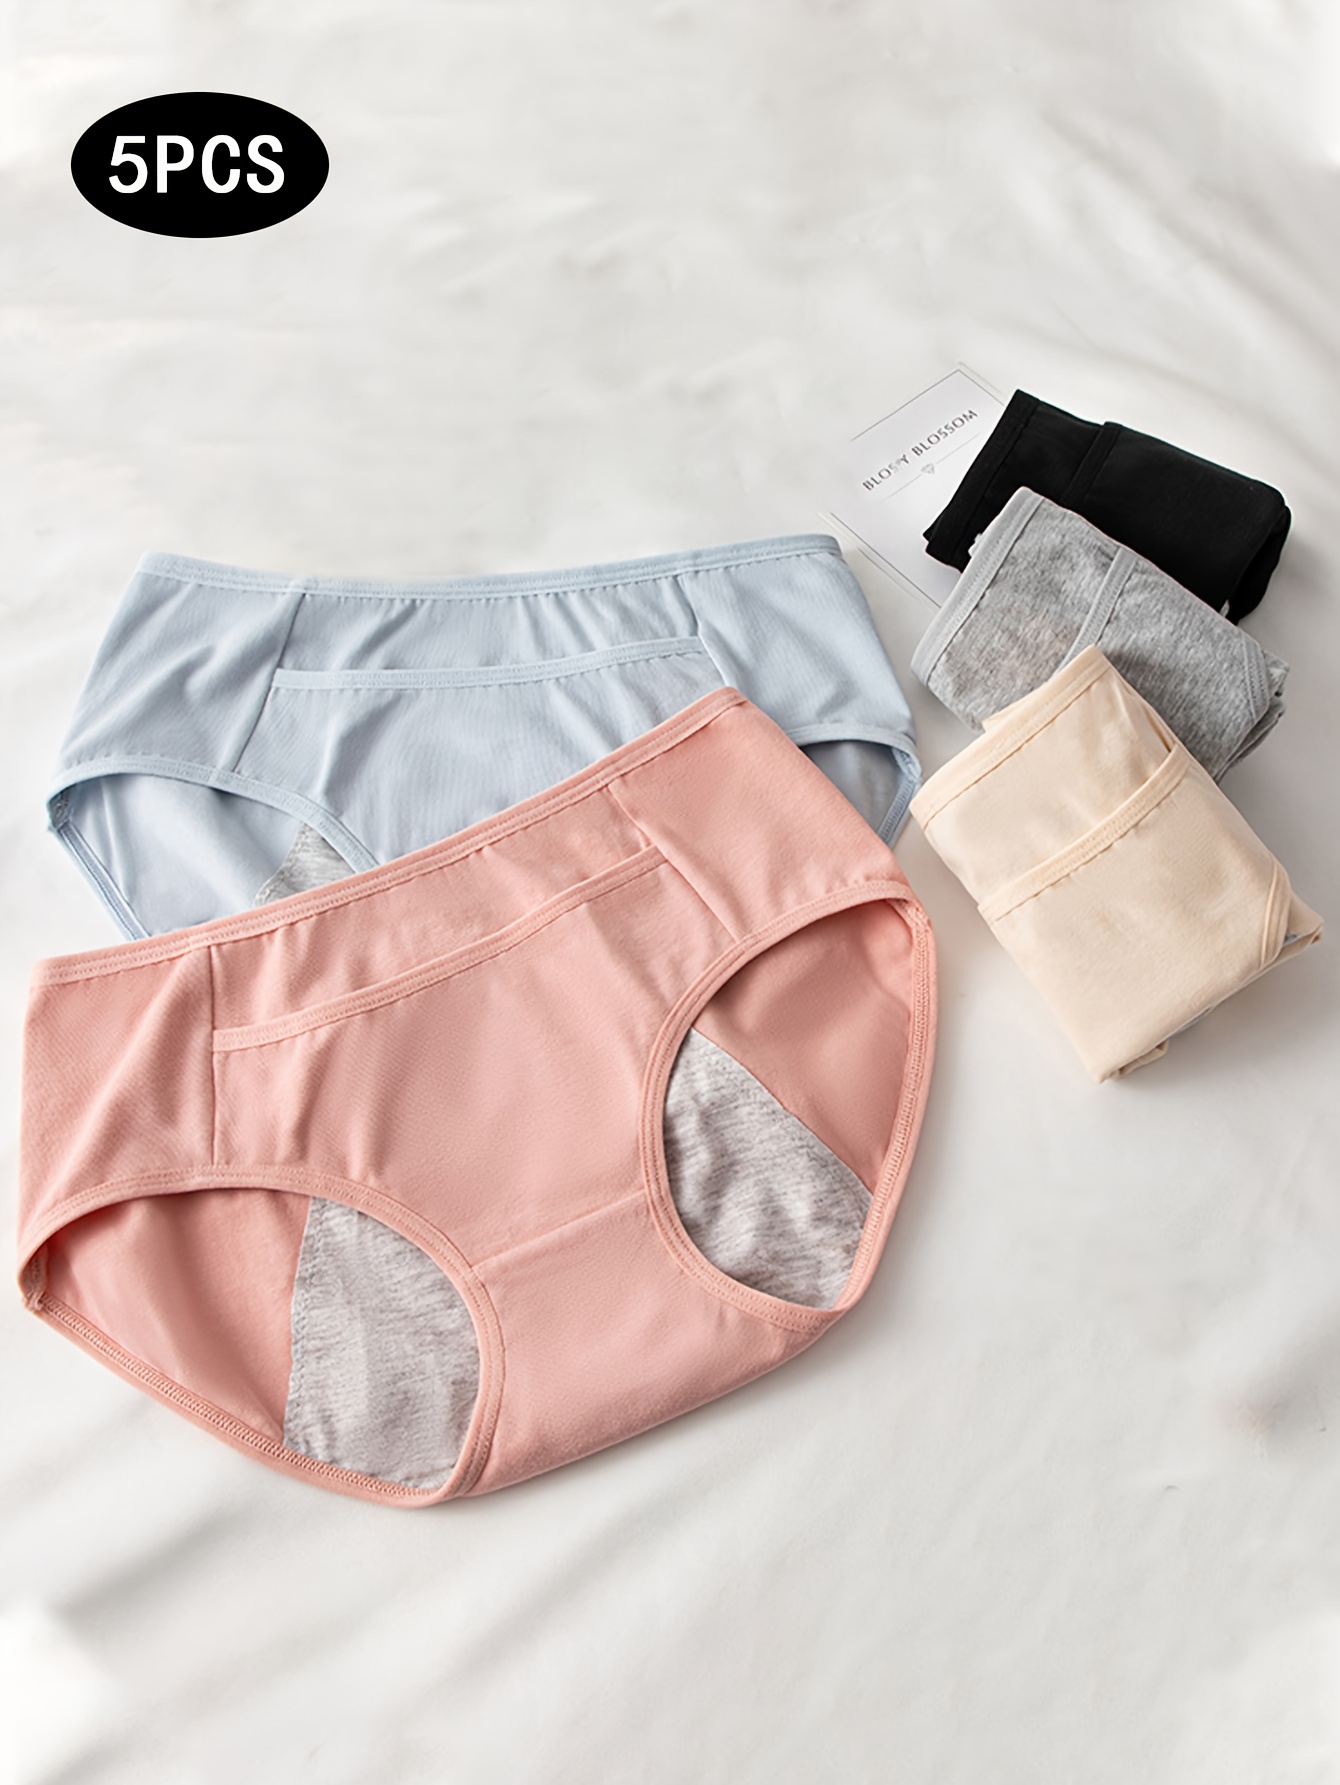 What Is The Pocket in Women's Panties For?